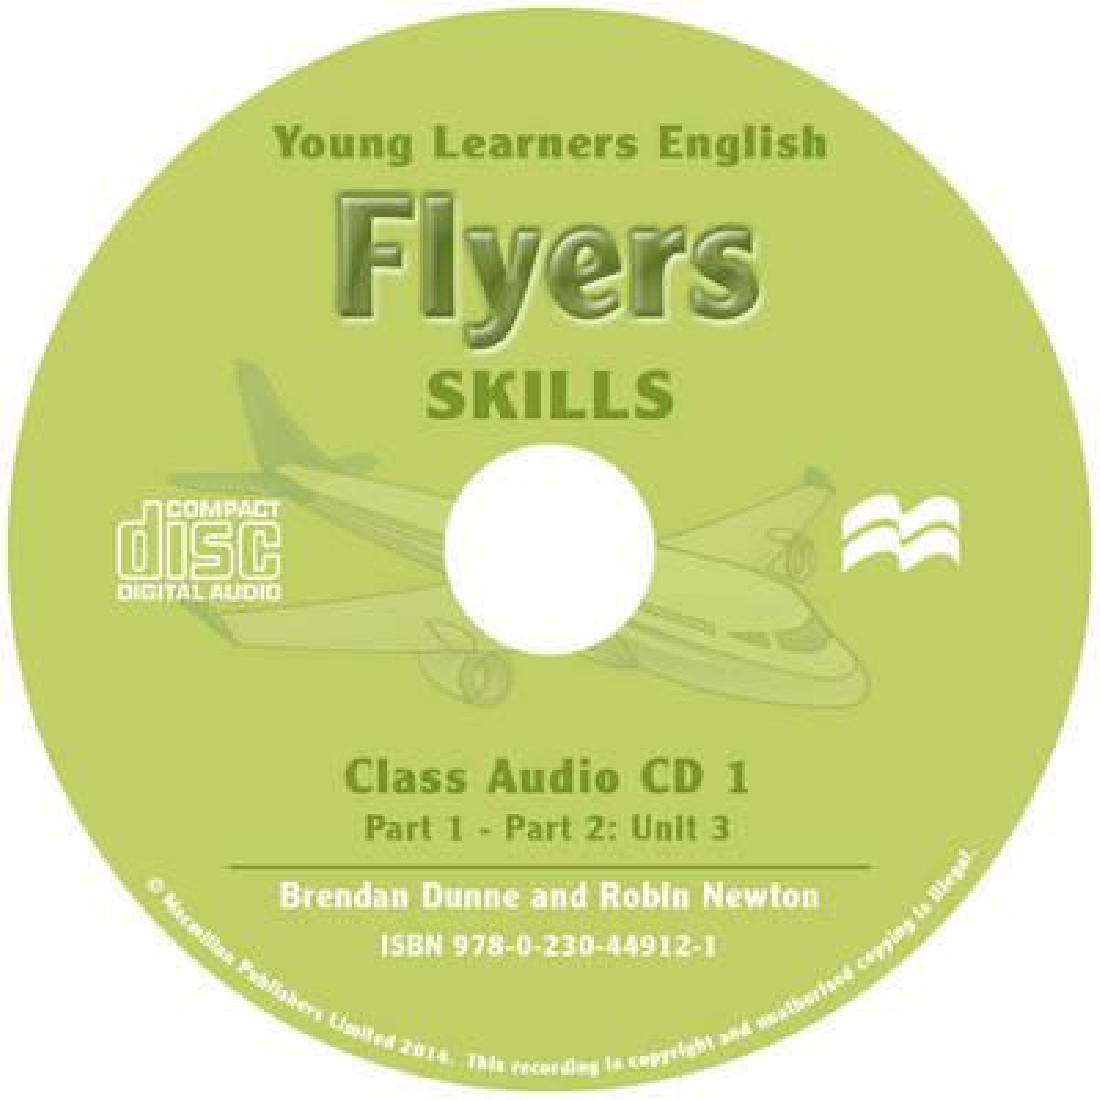 YOUNG LEARNERS ENGLISH SKILLS FLYERS CD AUDIO CLASS (2)